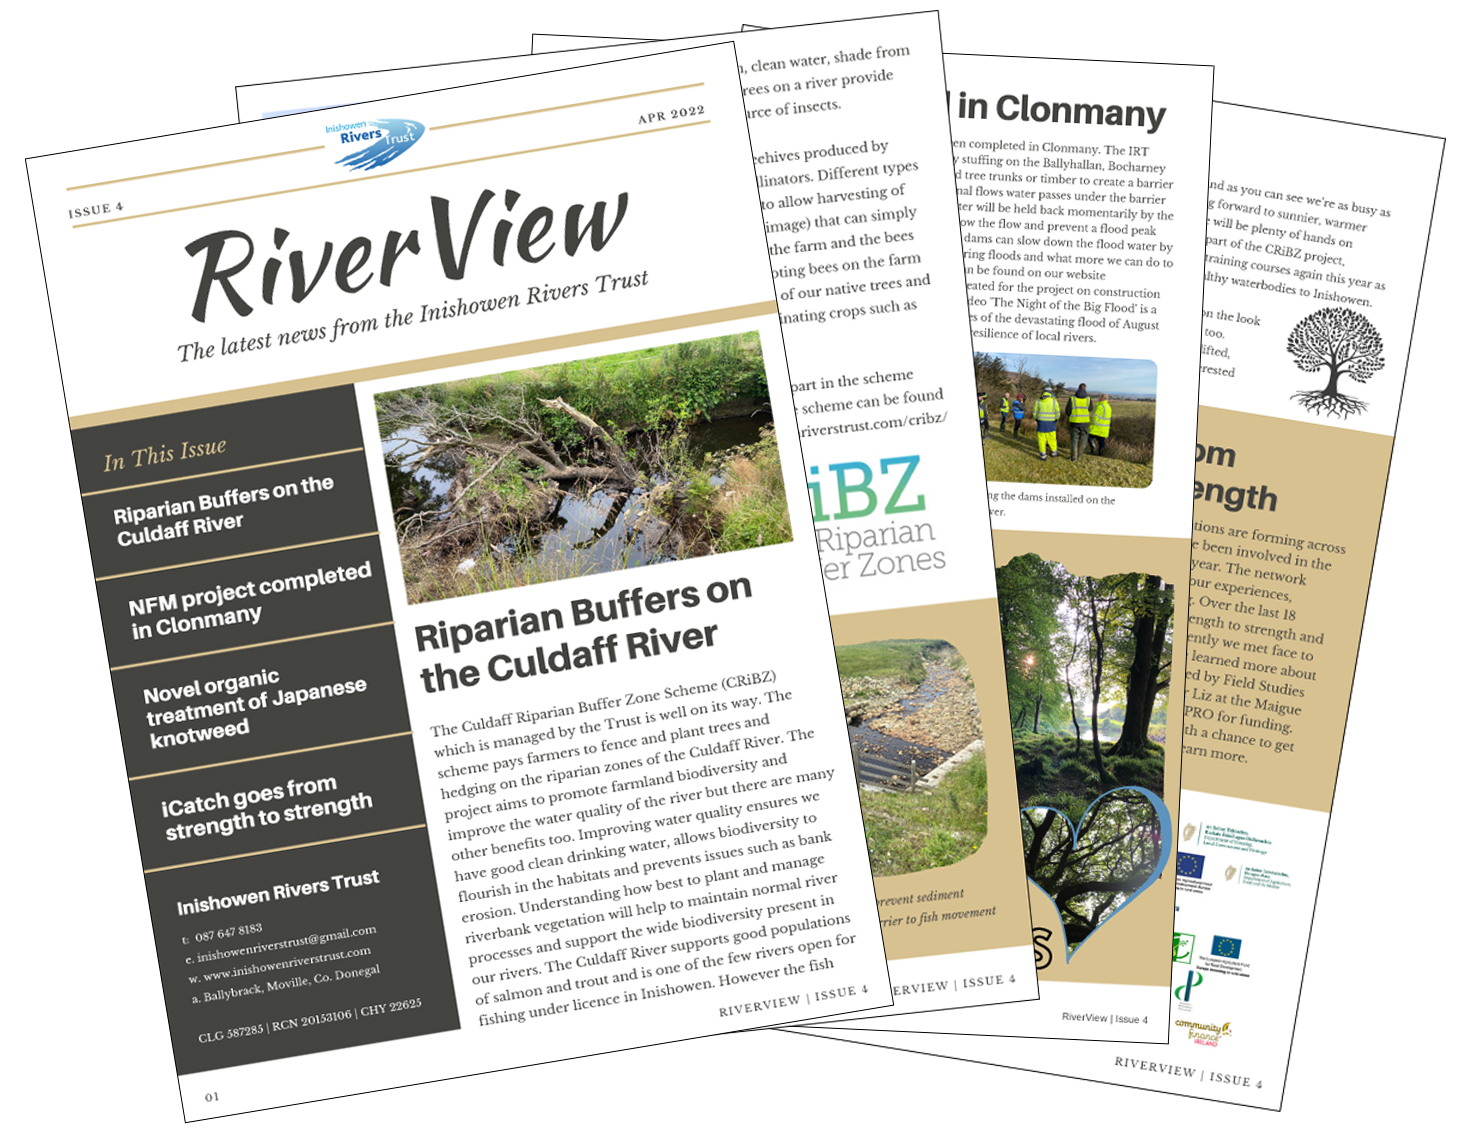 RiverView-Issue4-tn